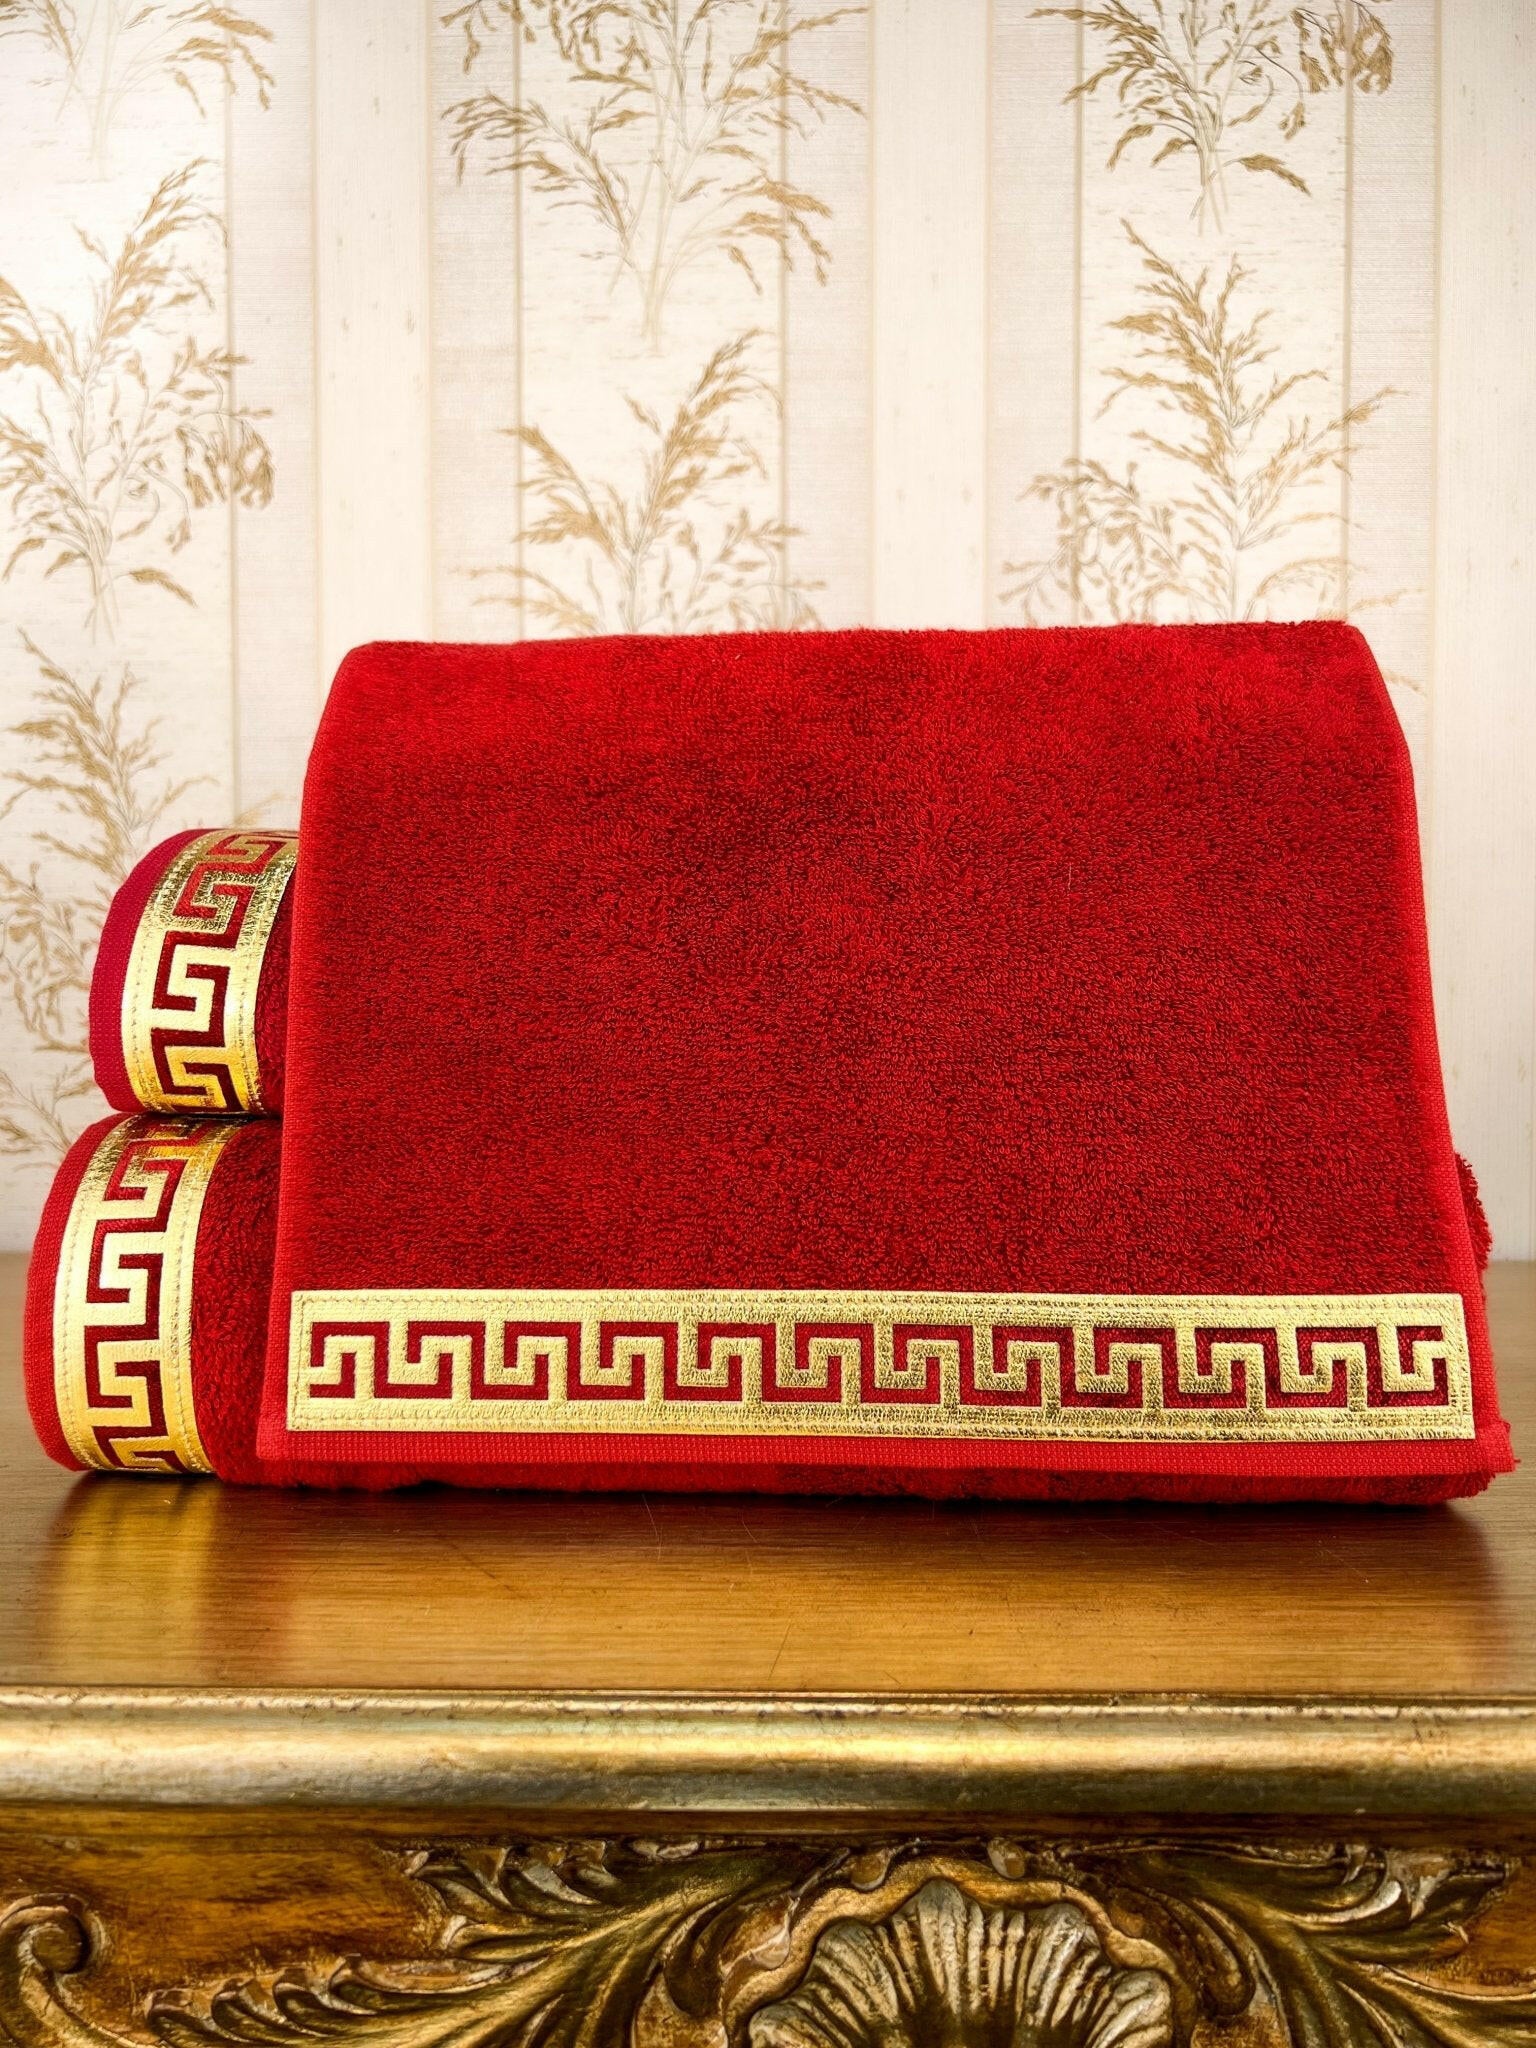 Anka Burgundy & Gold Towel Set - Creative Home Designs, Versace Style Greek Key Patterned Burgundy & Gold Bamboo Luxury & Expensive Turkish Towels,TS-CH-ANKARG